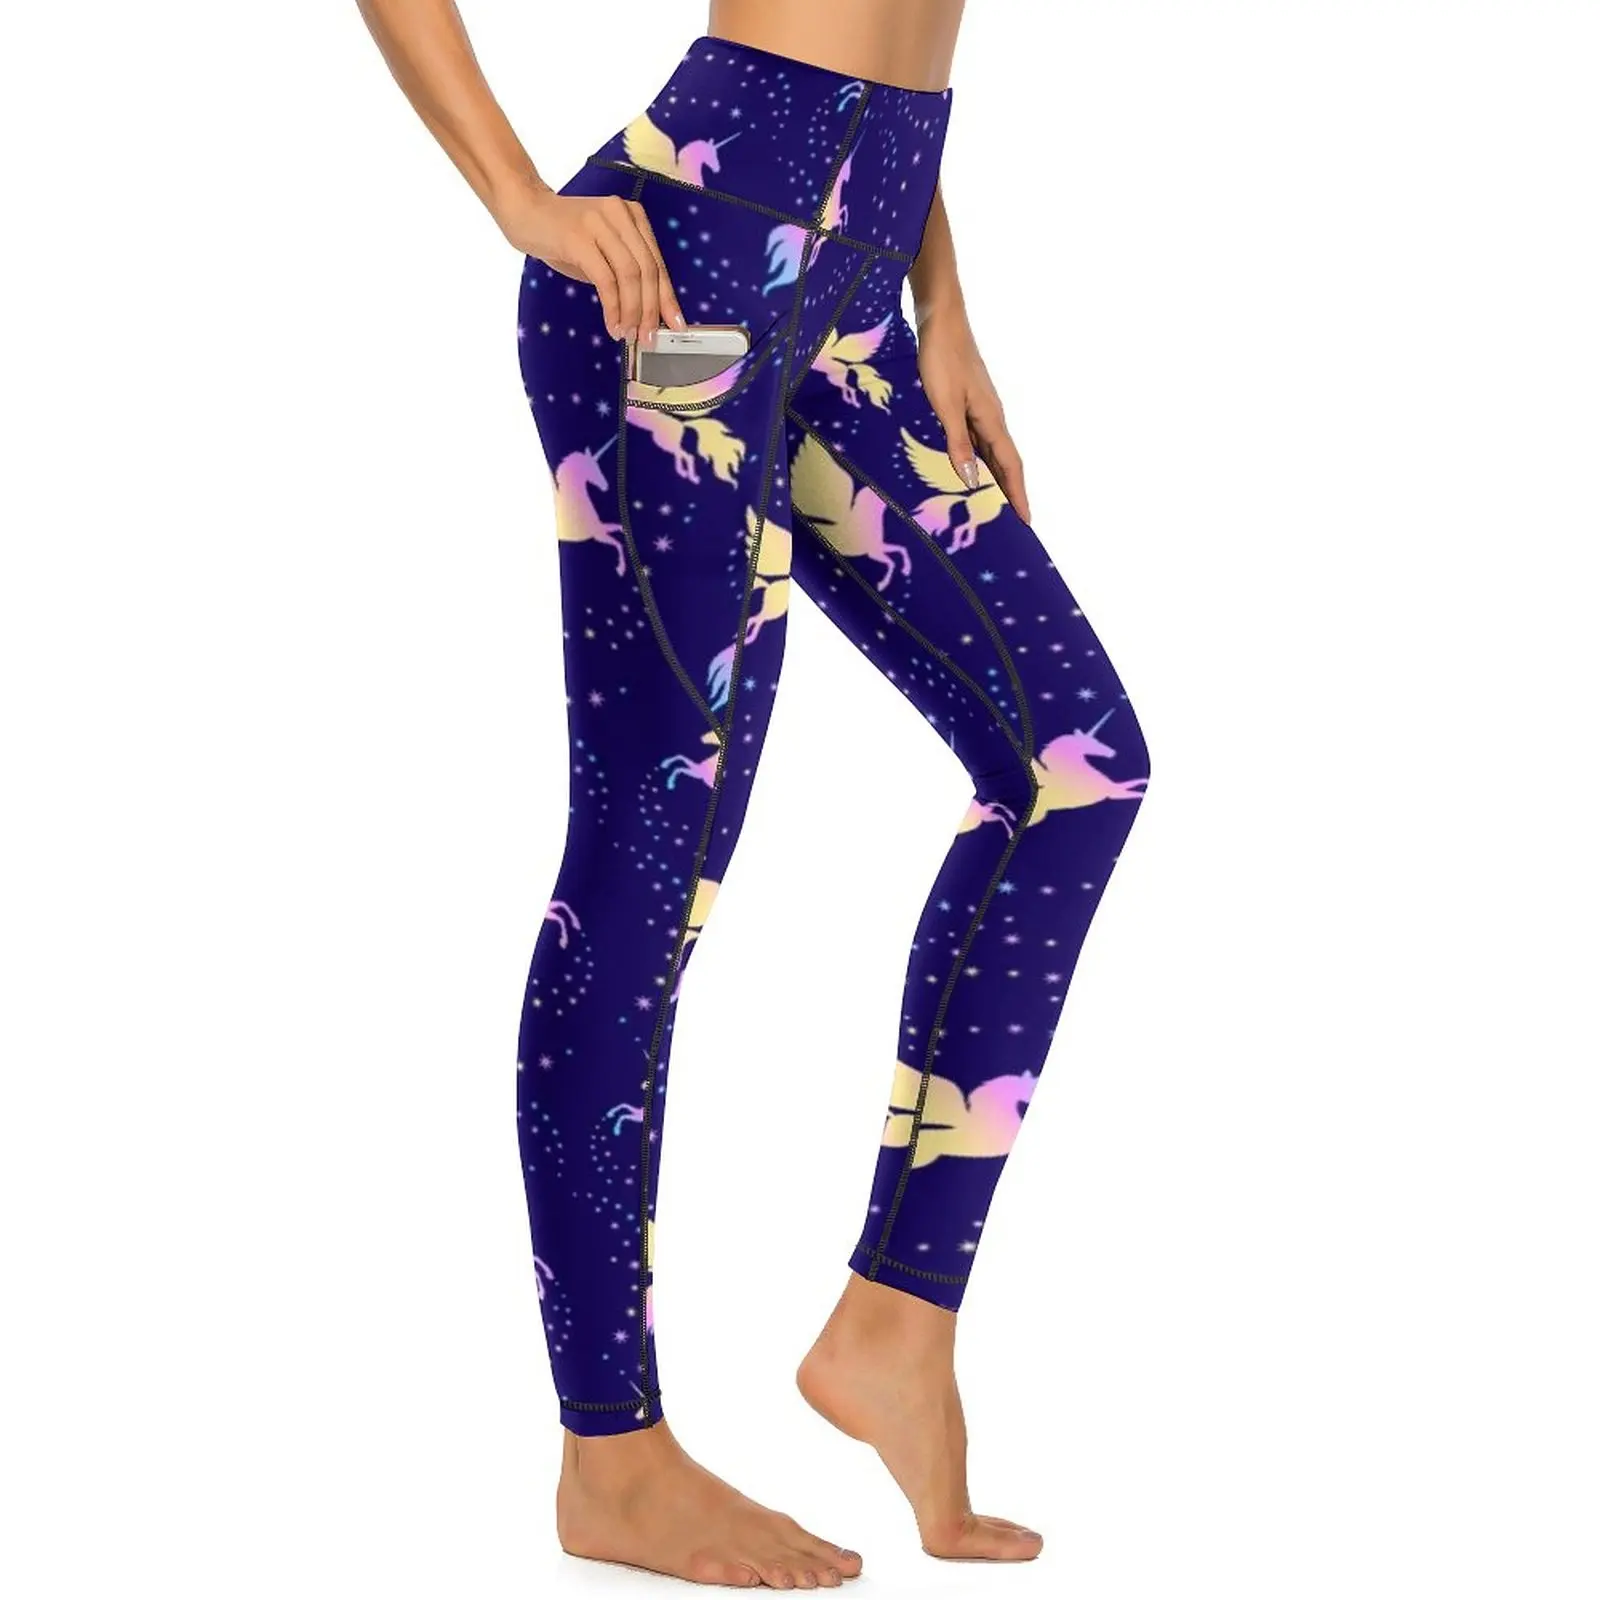 

Flying Unicorn Leggings Starry Sky Print Fitness Yoga Pants Lady High Waist Aesthetic Leggins Sexy Stretch Graphic Sports Tights